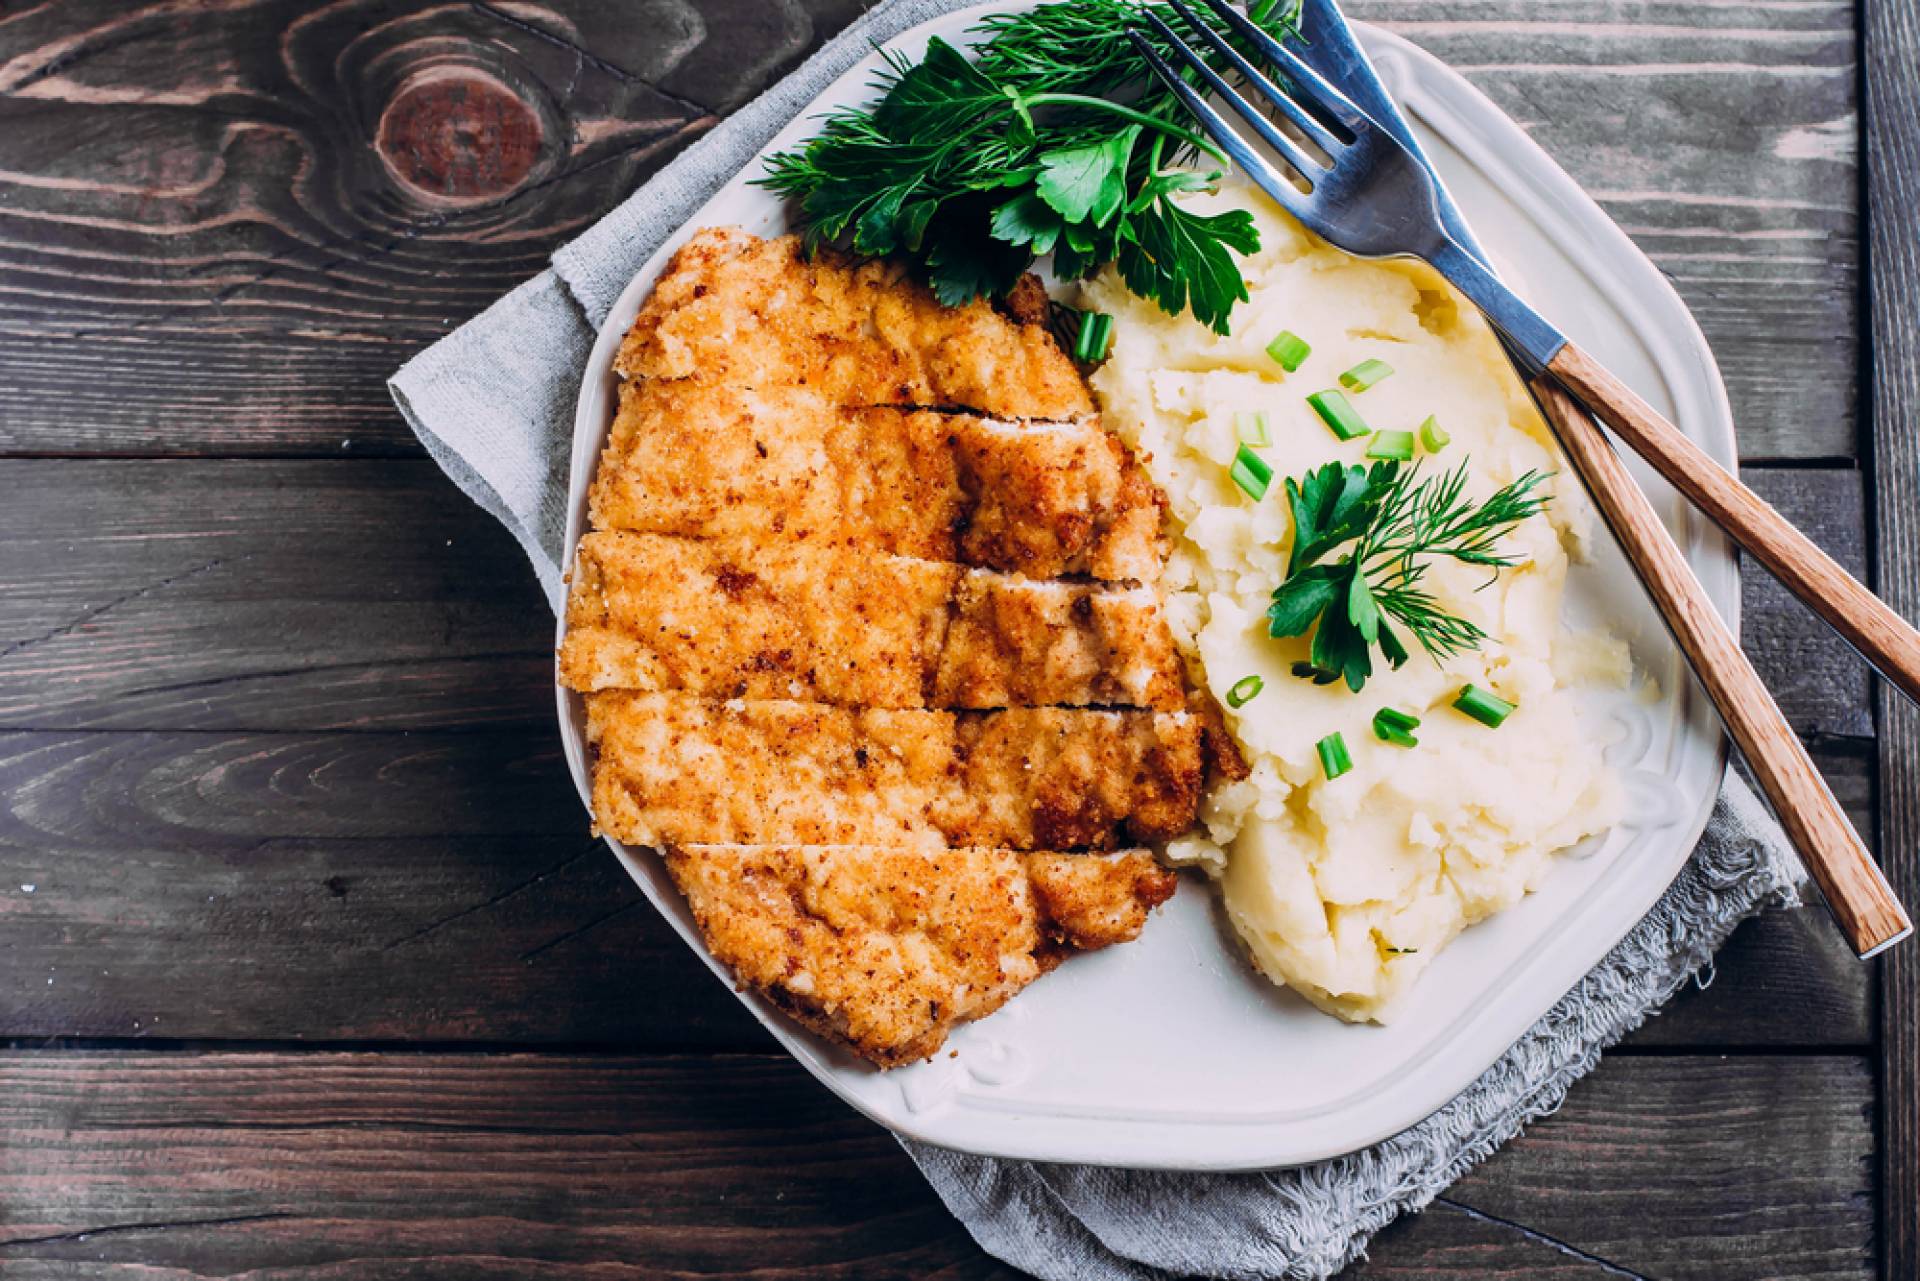 Pork Schnitzel with Mashed Potatoes